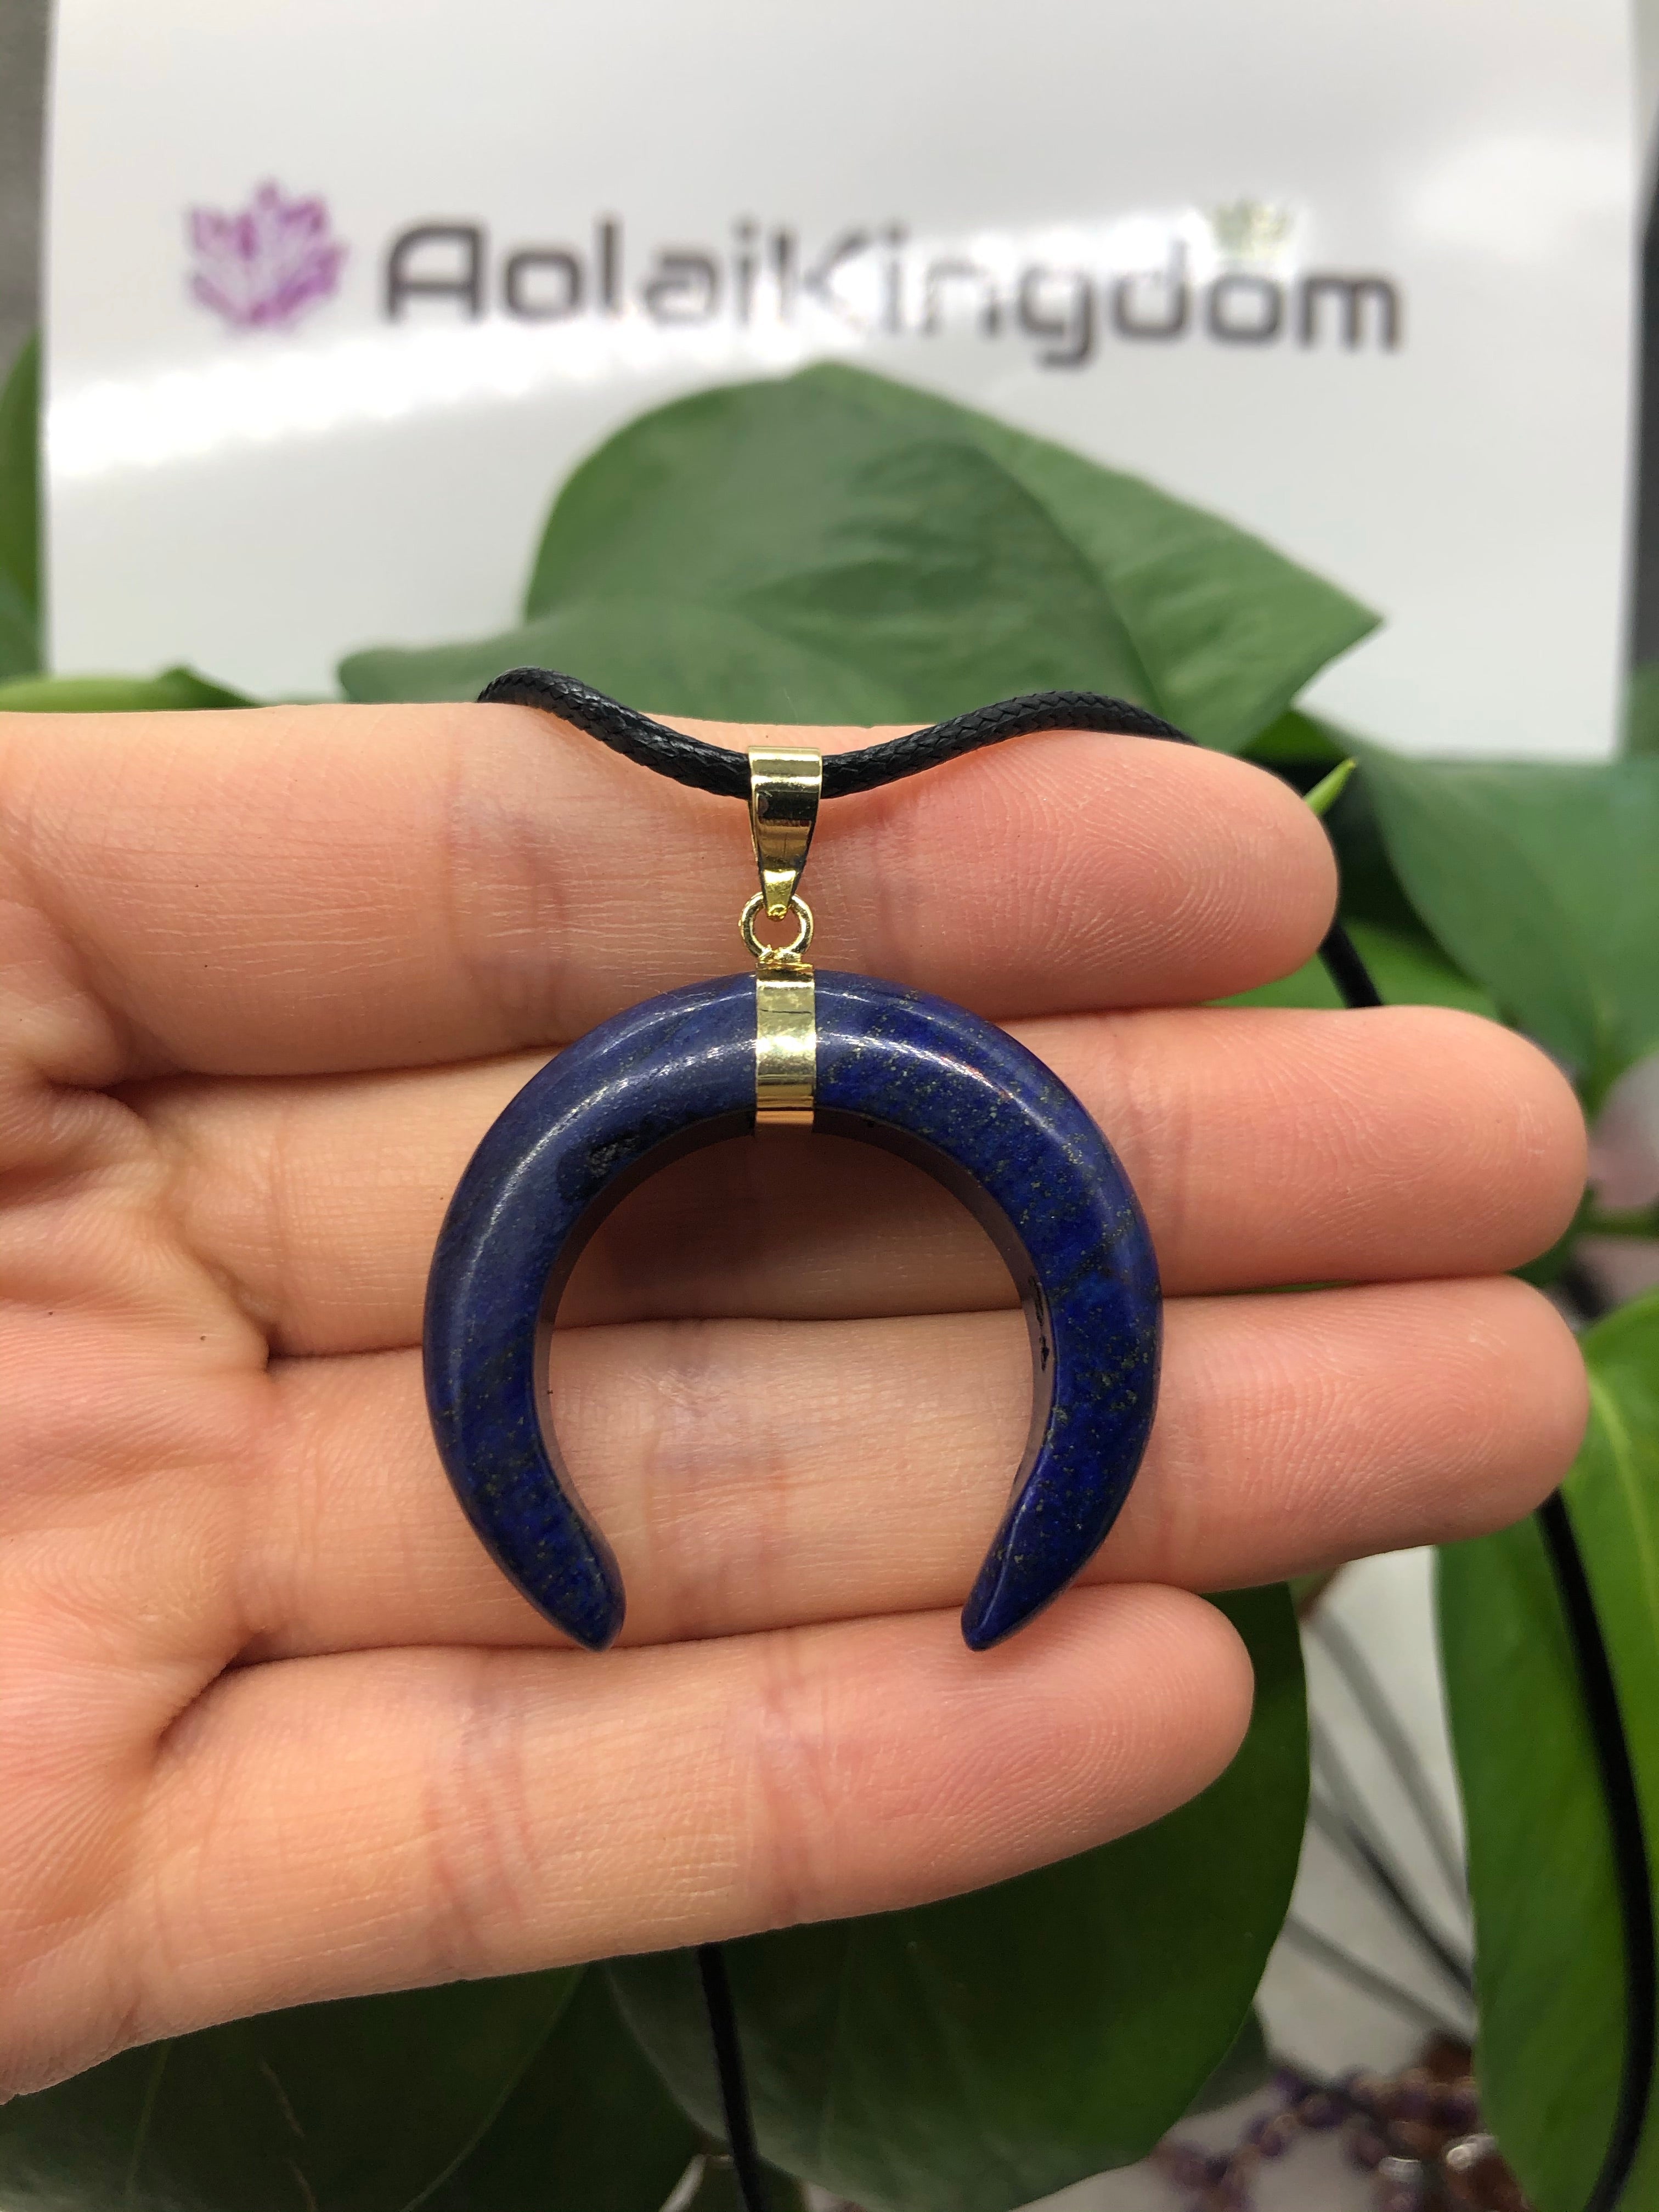 Moon /ox’s horn pendant/necklace